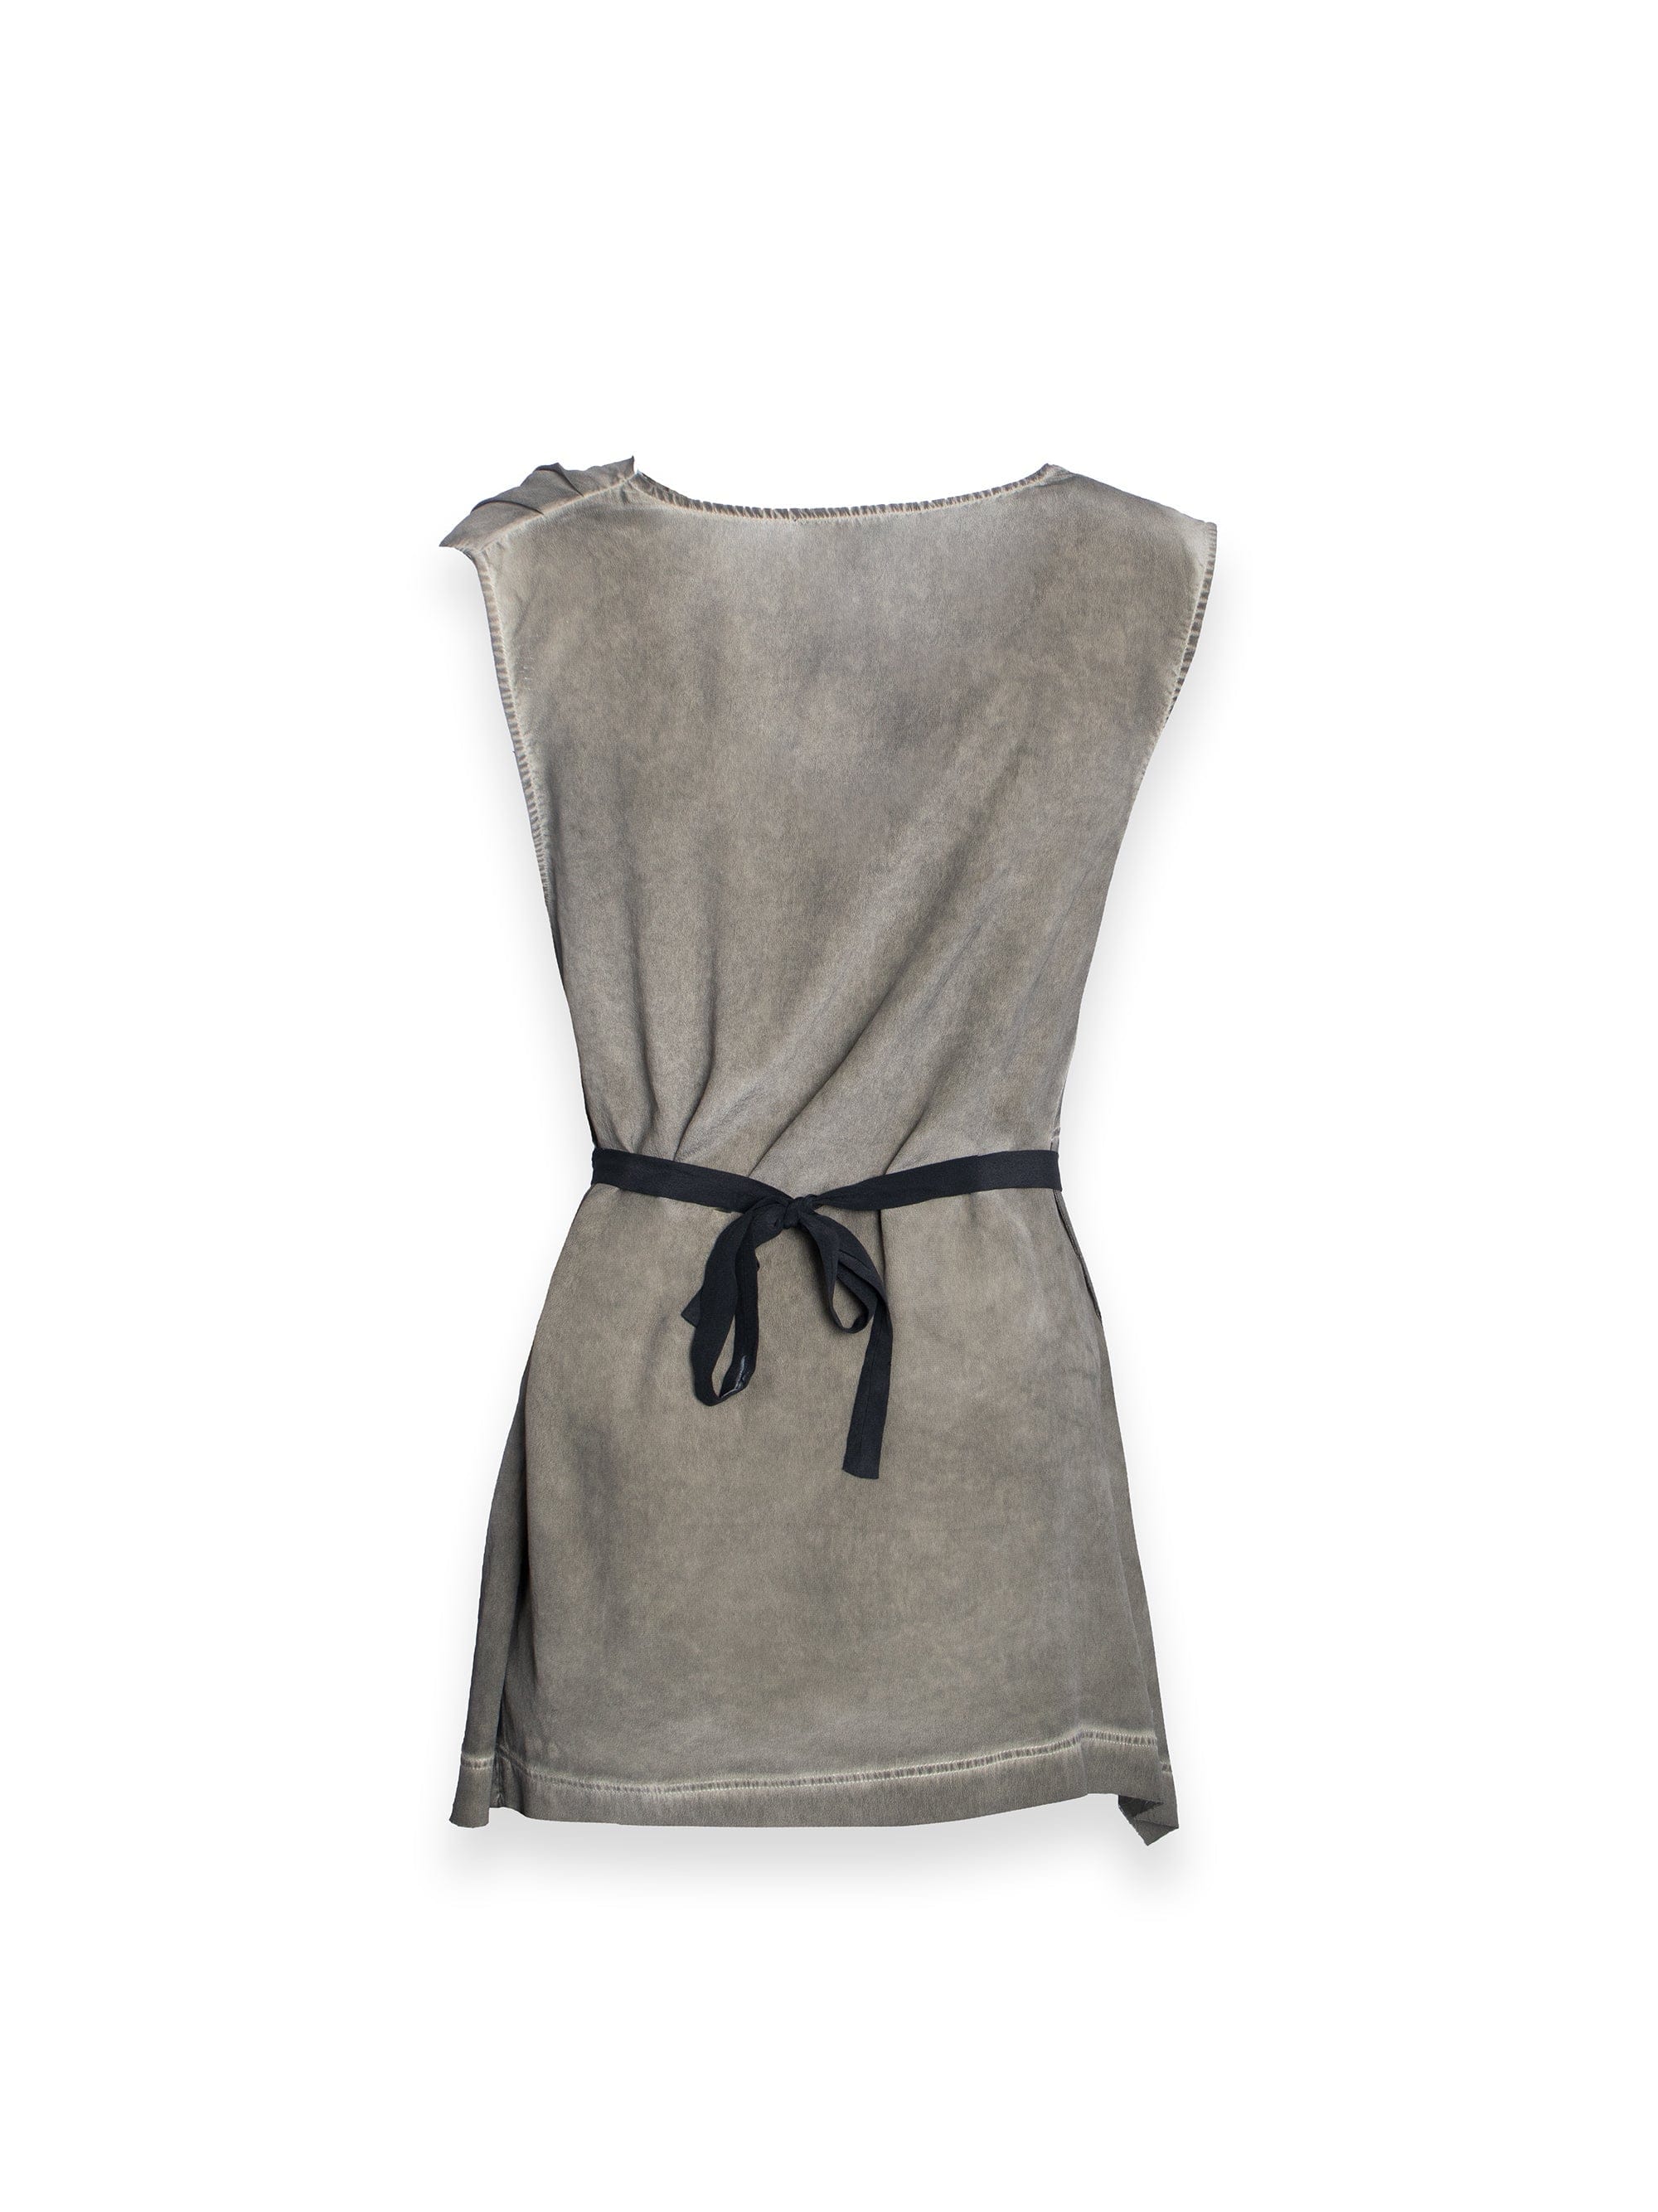 Stone Grey Cowl Neck Dress with Tie Up Detail